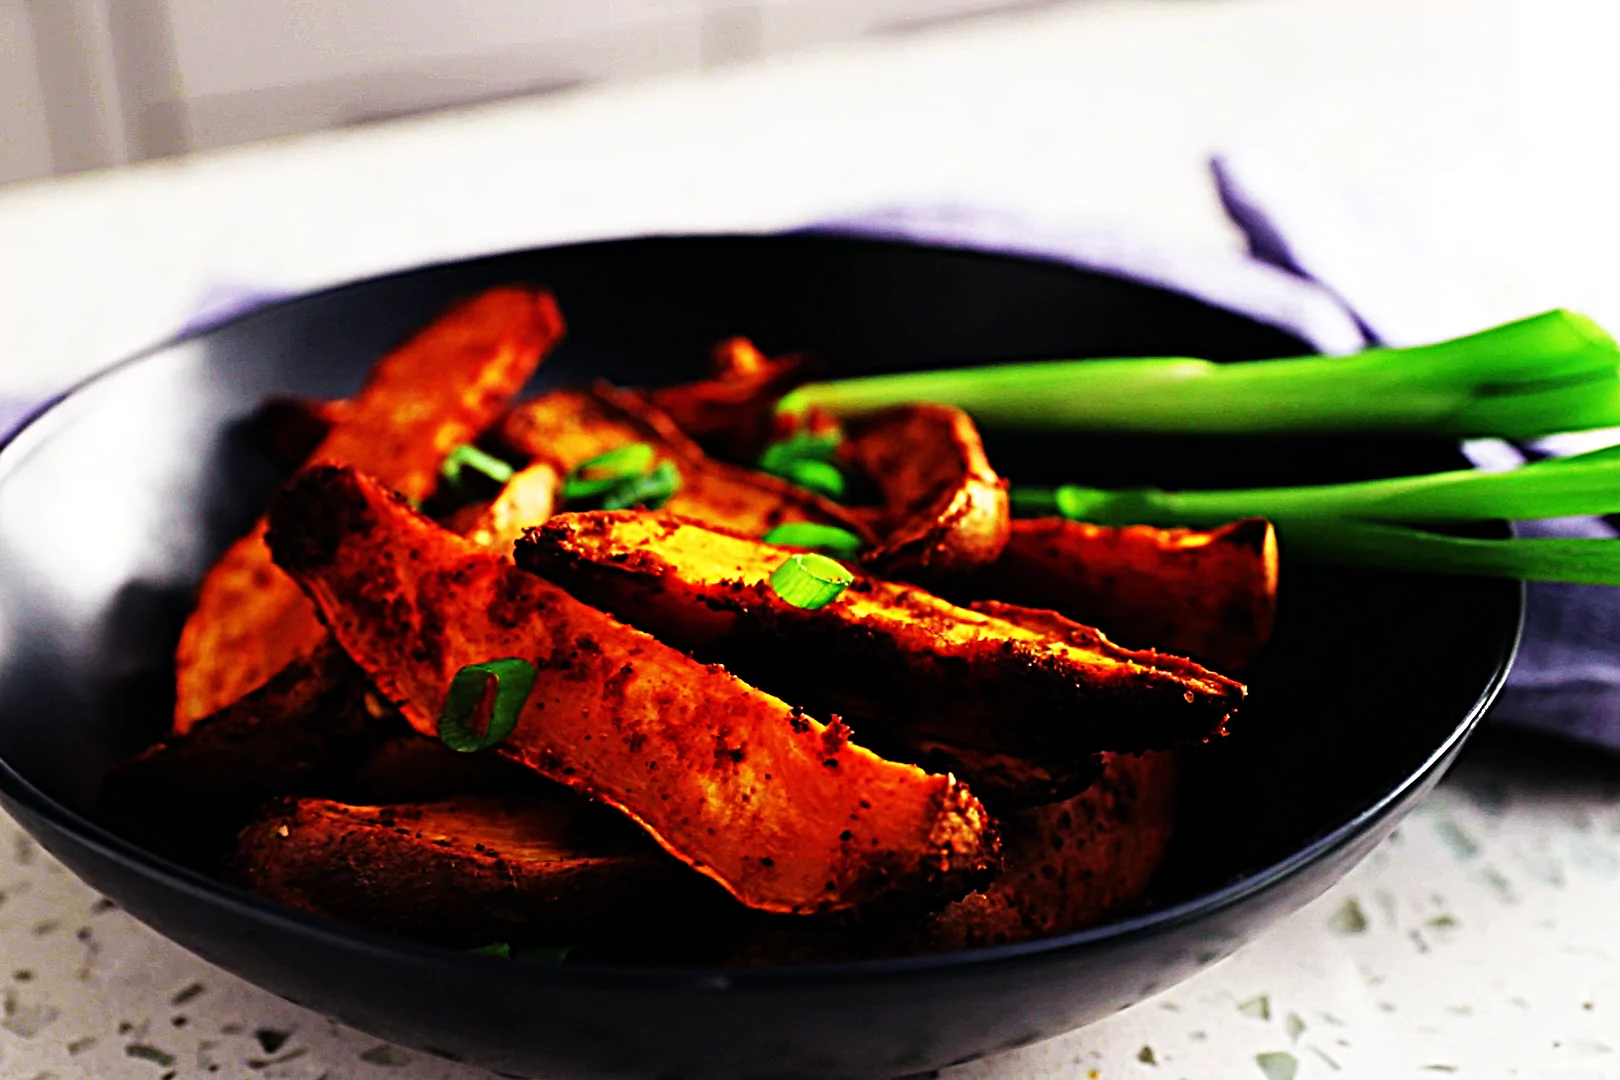 Stupid-Easy Recipe for Roasted Sweet Potato Fries with Spices (#1 Top-Rated)